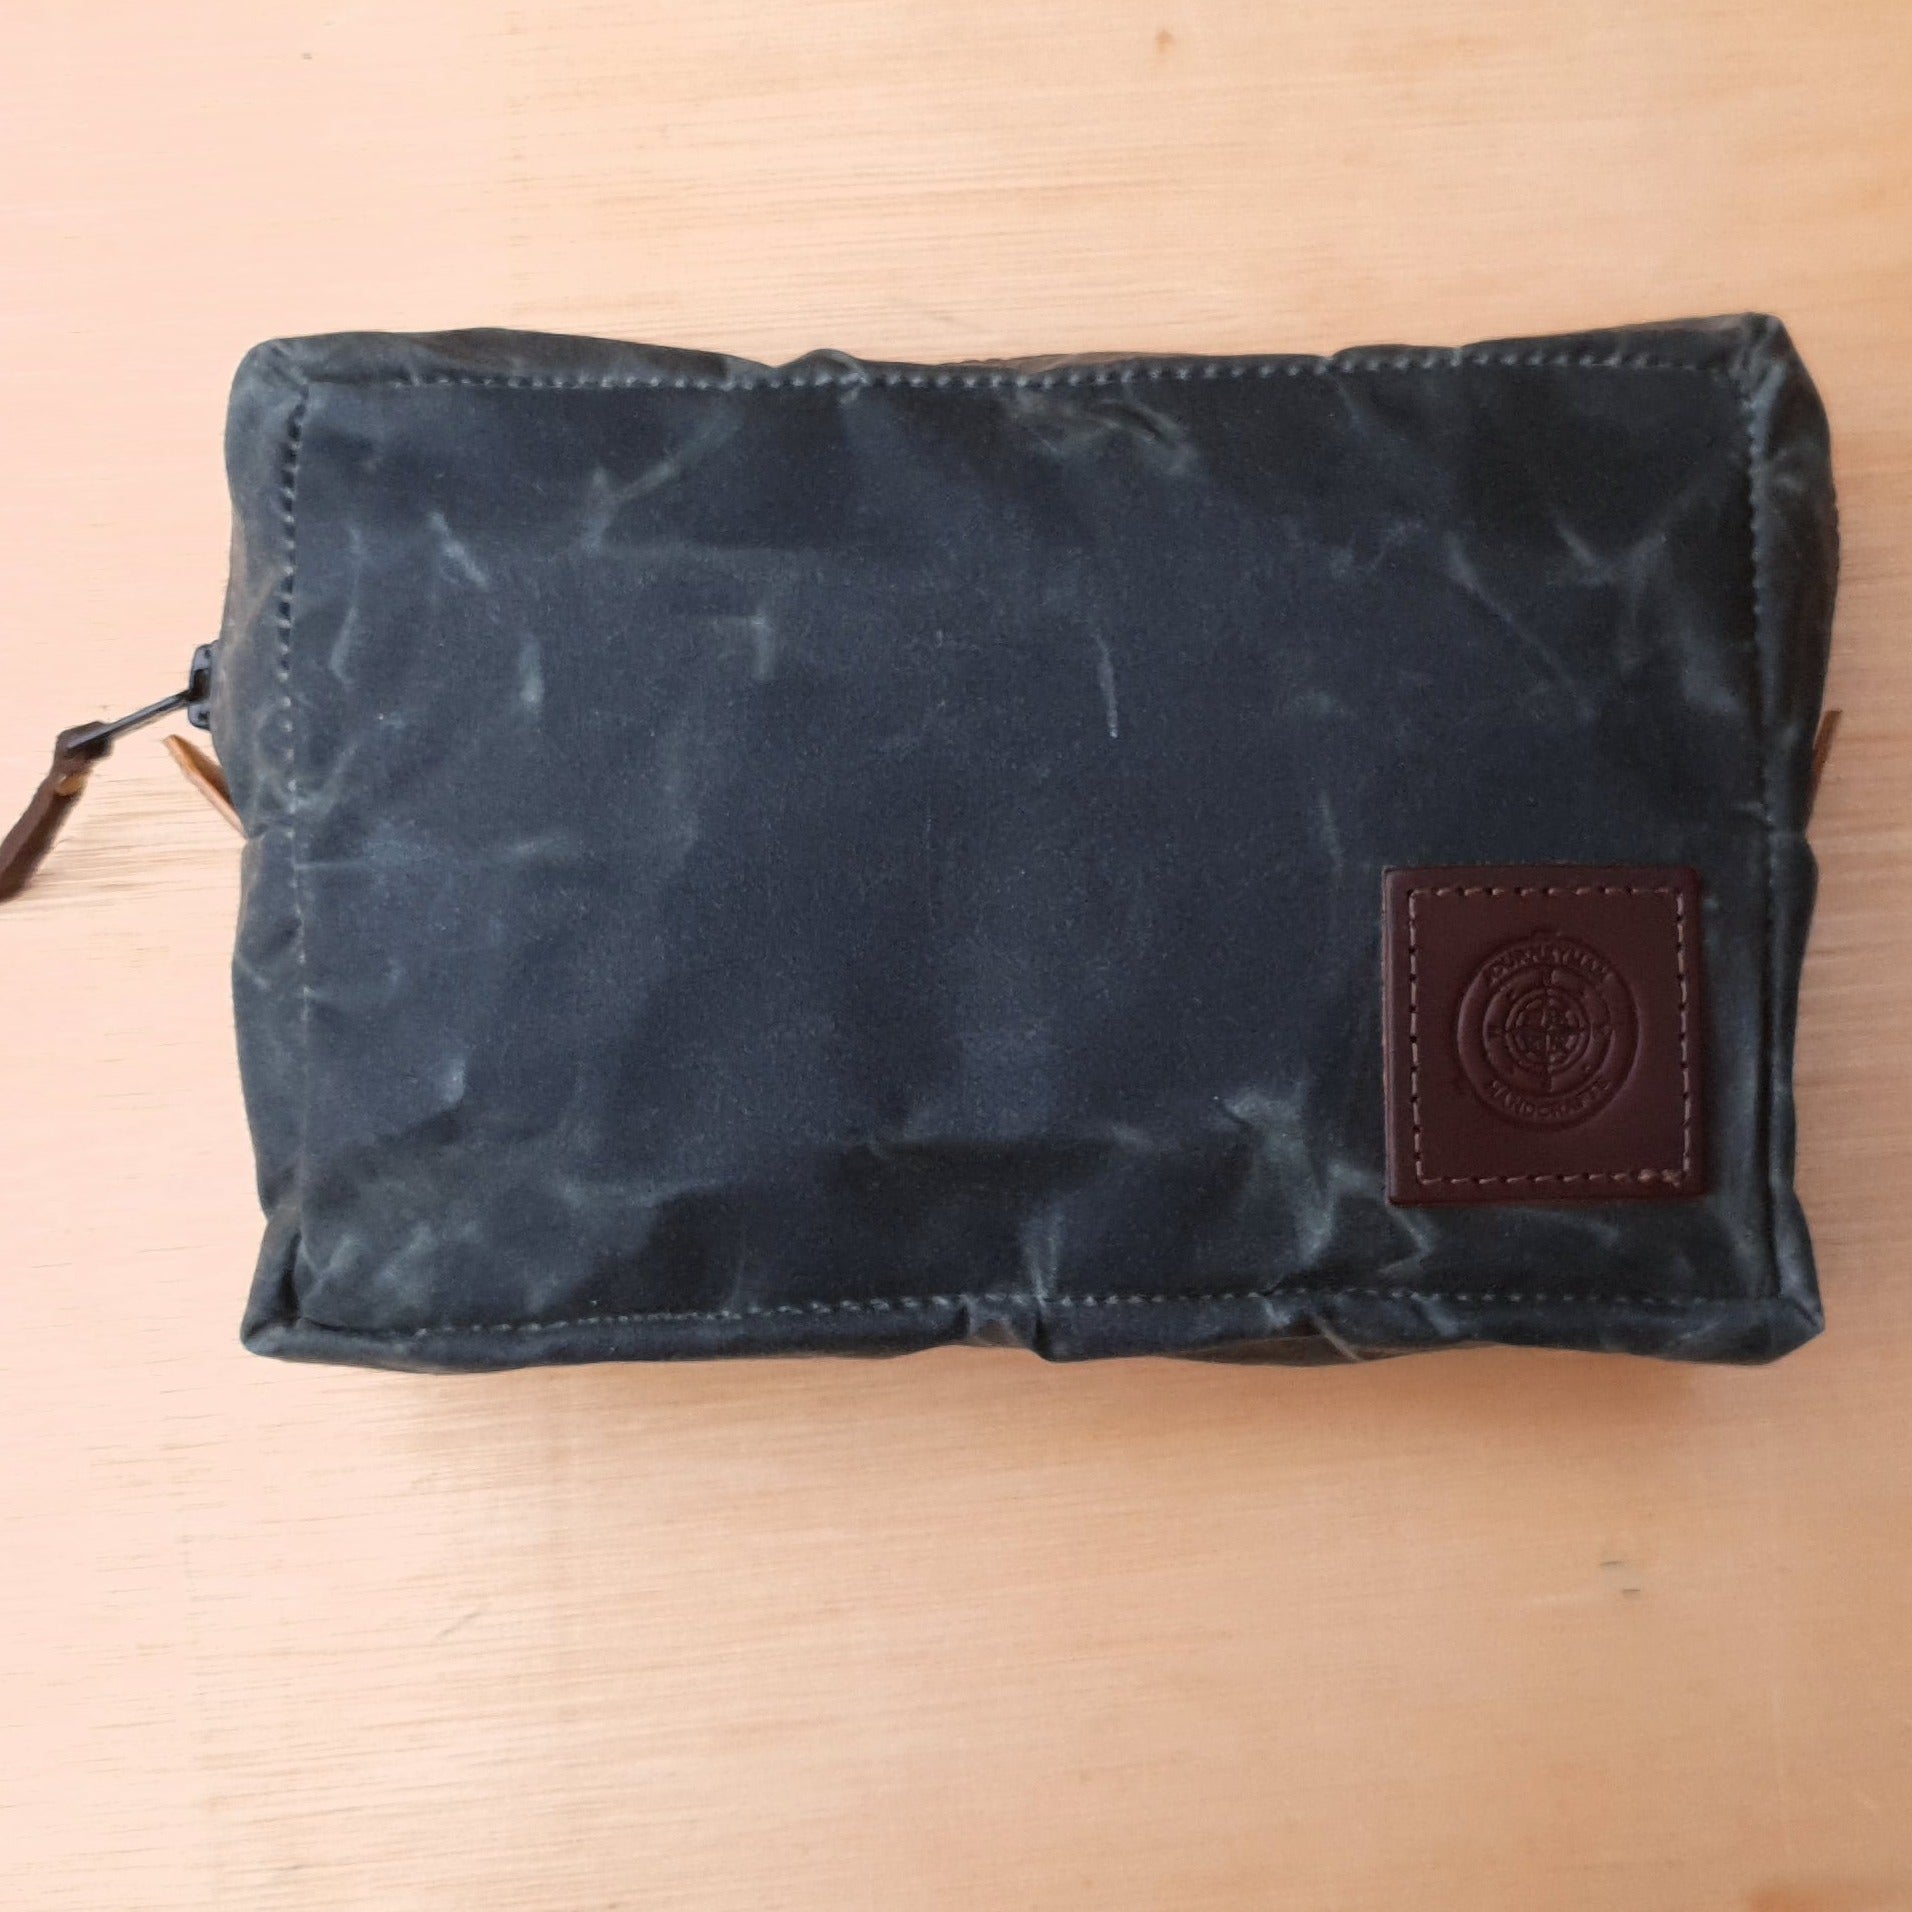 Wax canvas camping pouch